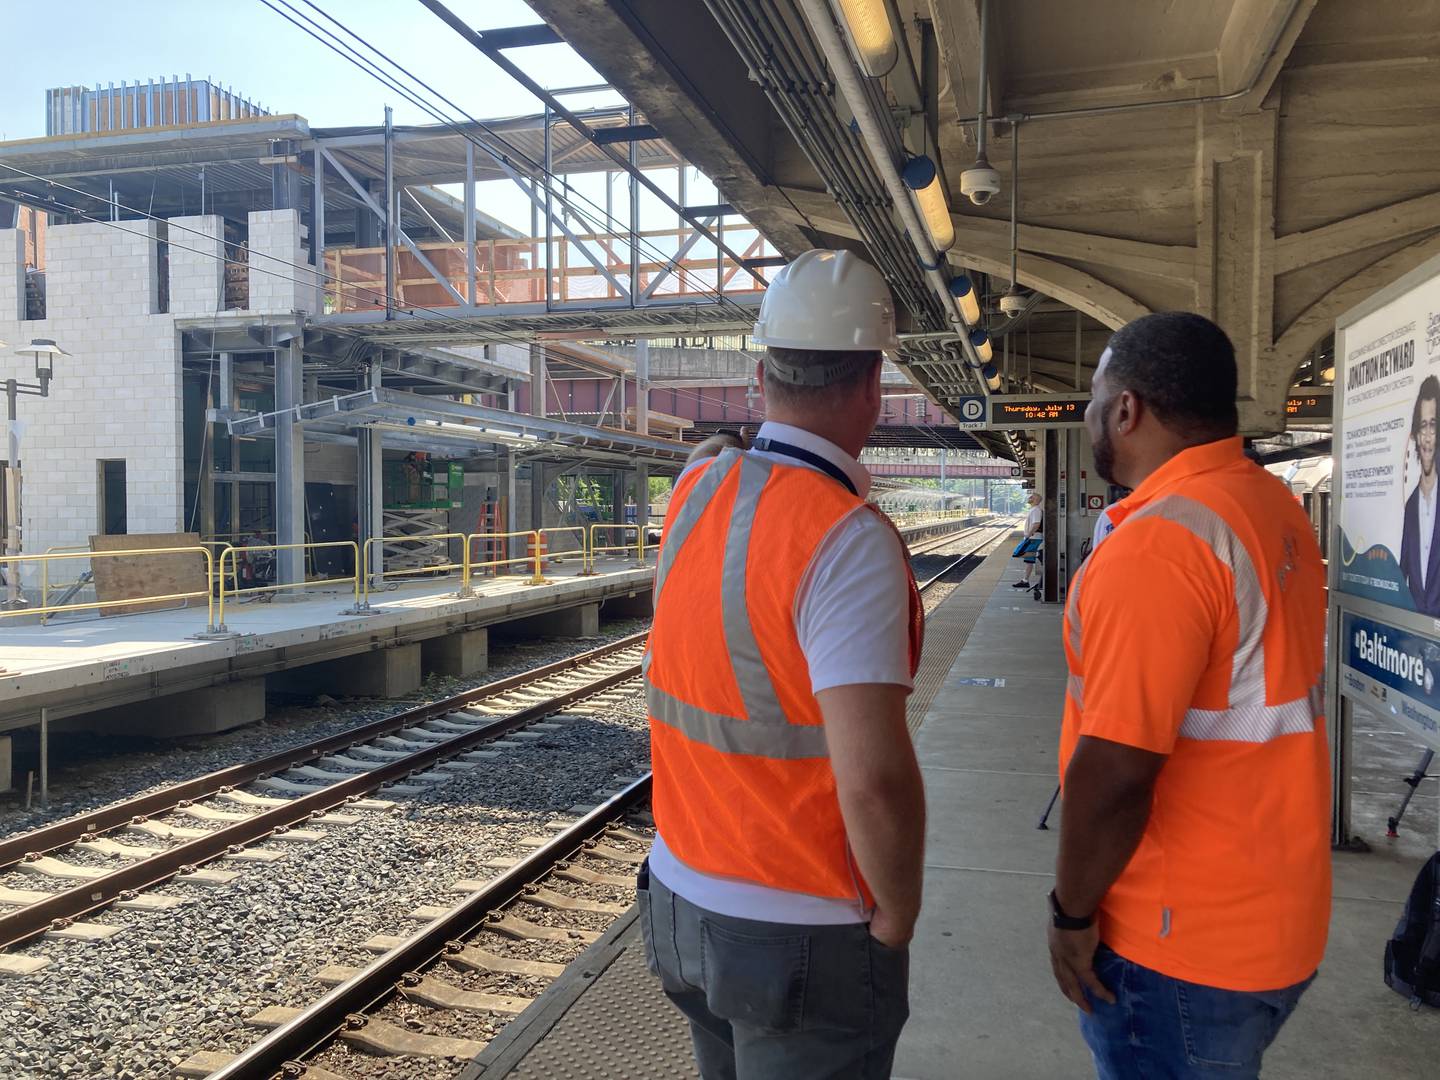 Two project managers with orange vests look on at construction for a train platform inside a station.